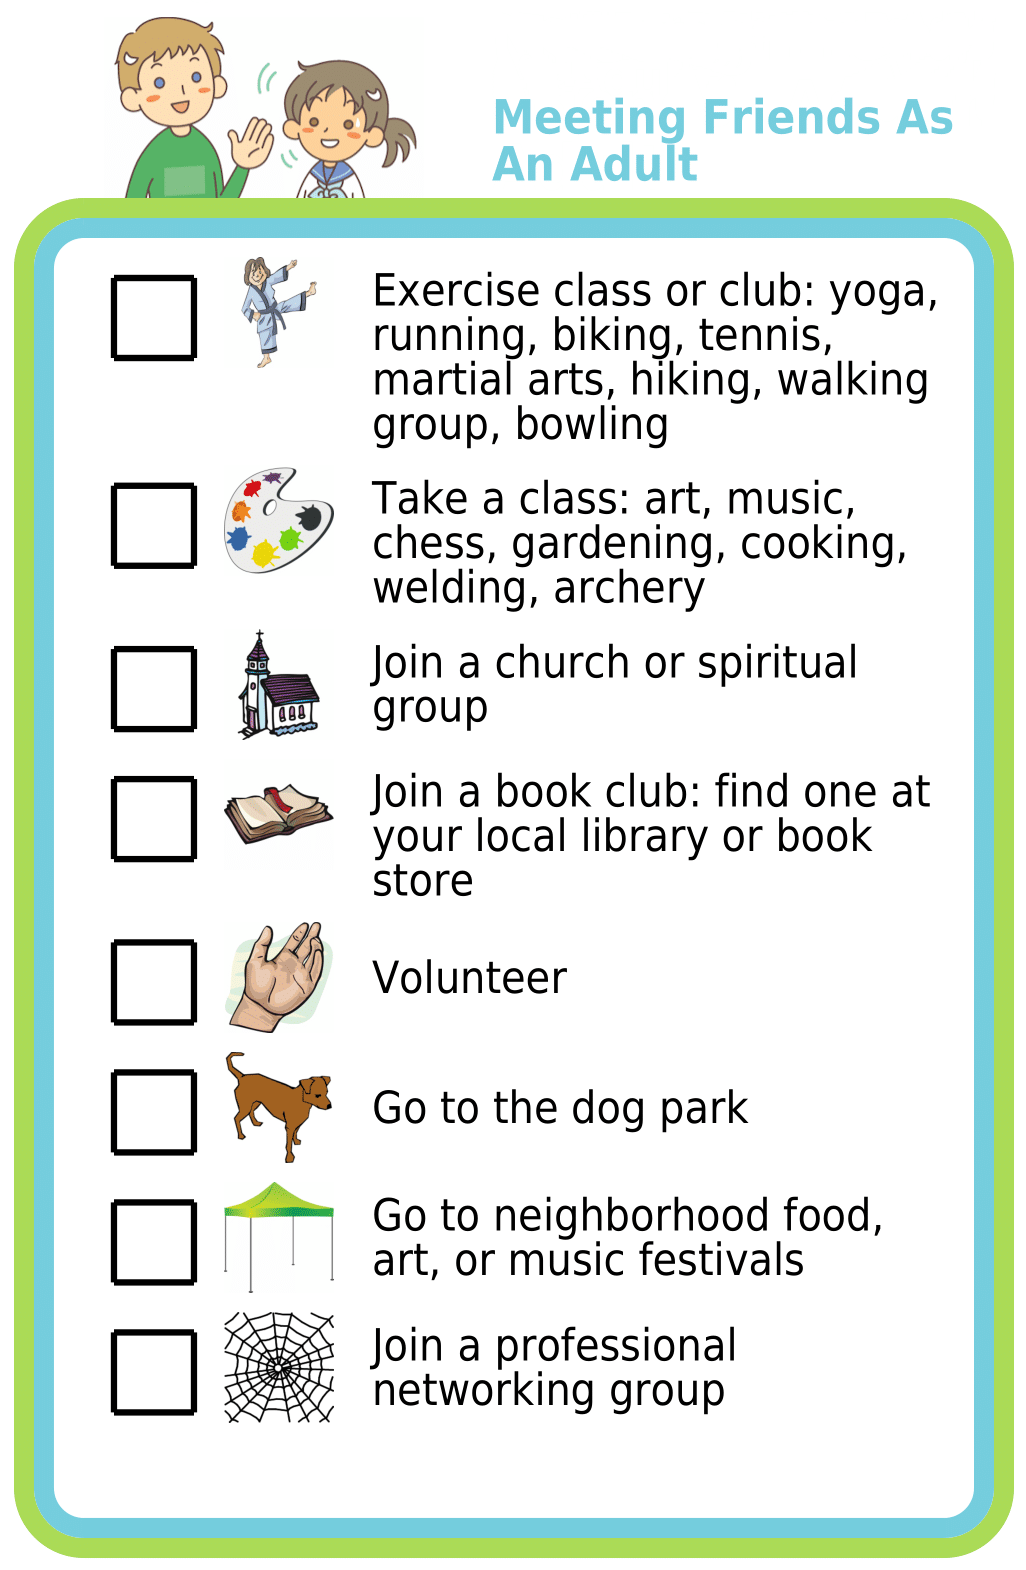 Picture checklists with ideas for where adults can meet friends.